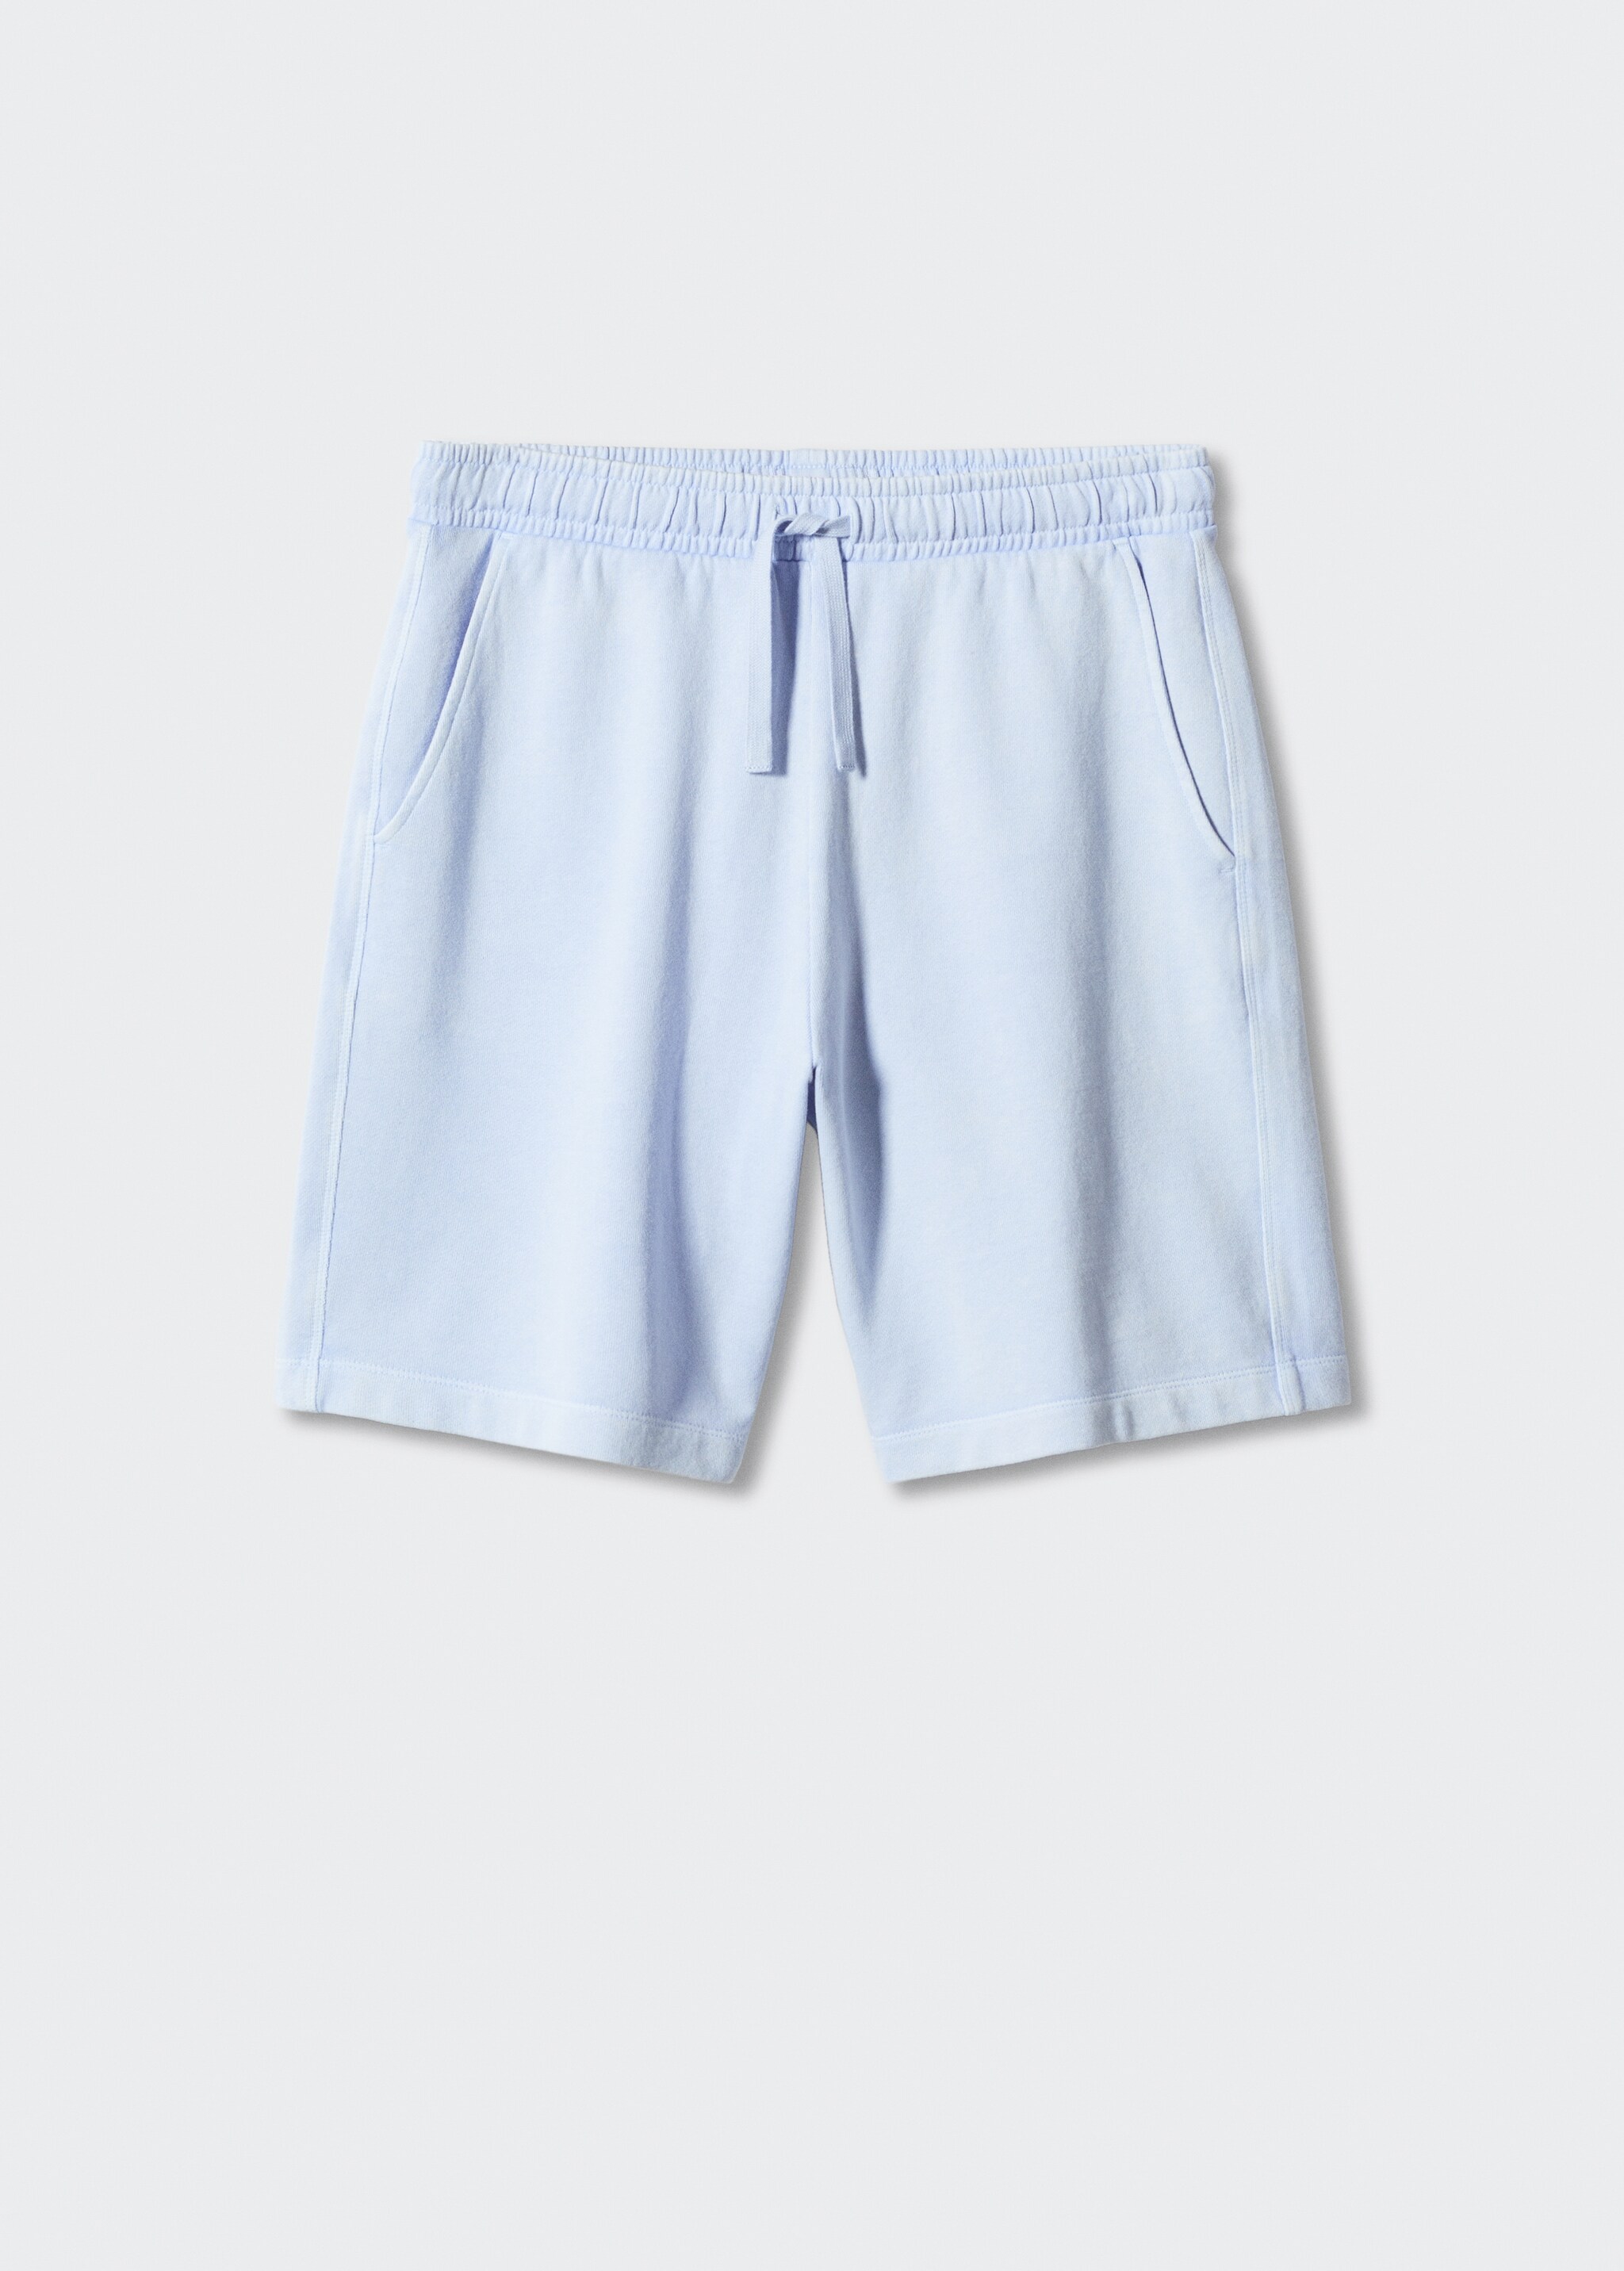 Dyed cotton jogging shorts - Article without model